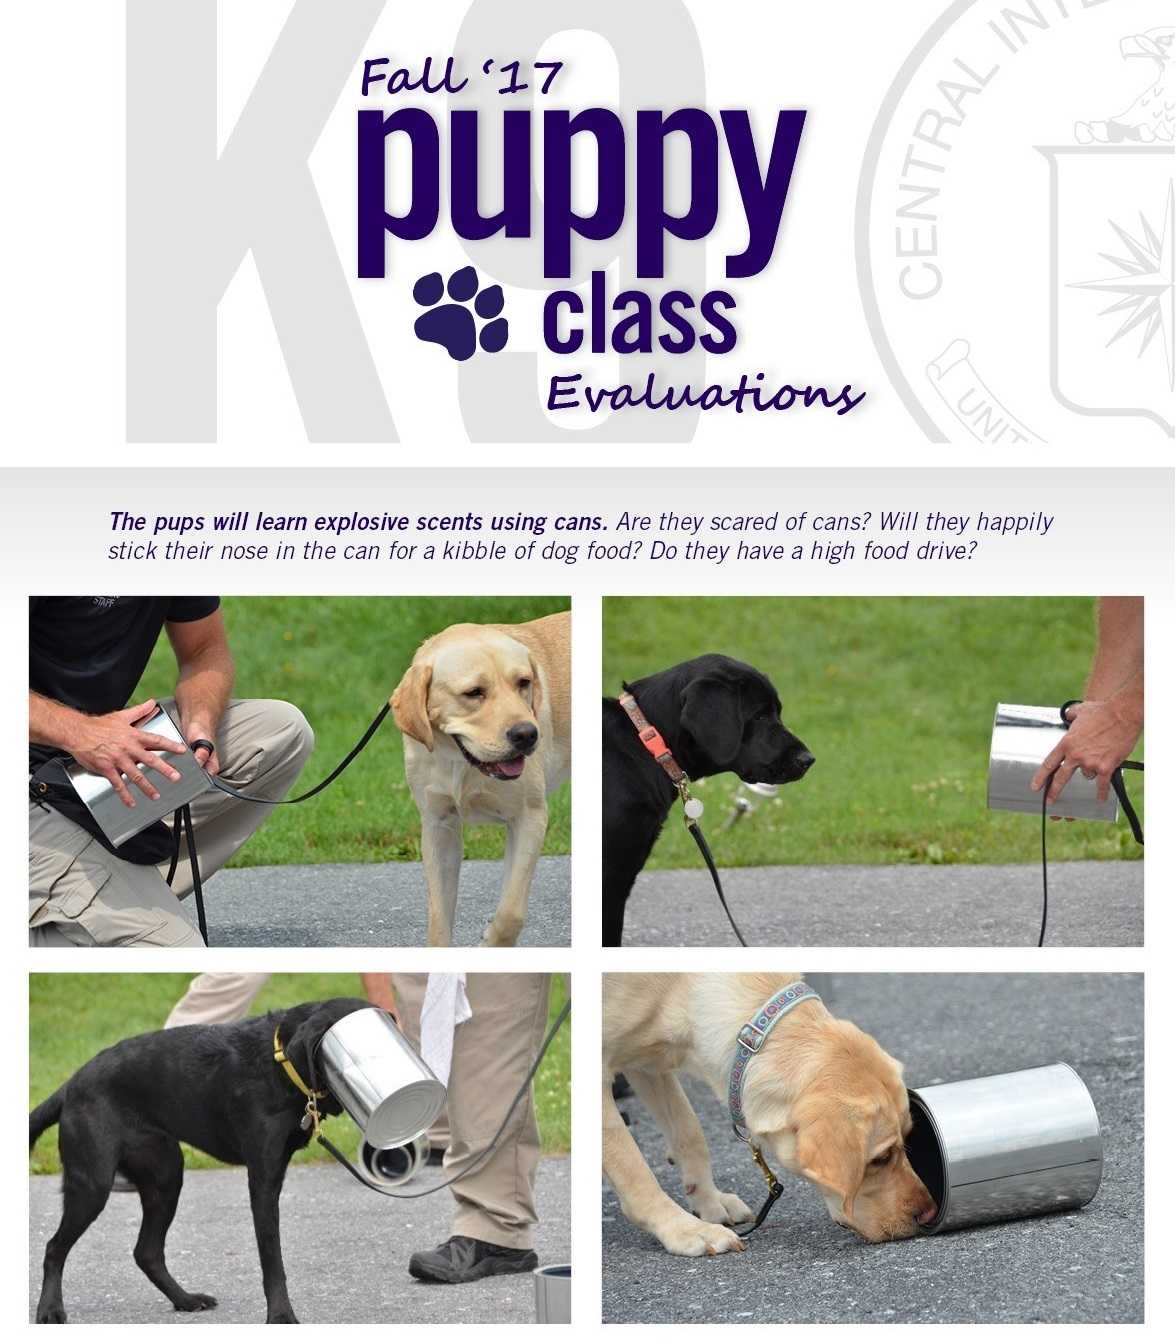 Puppy class evaluations